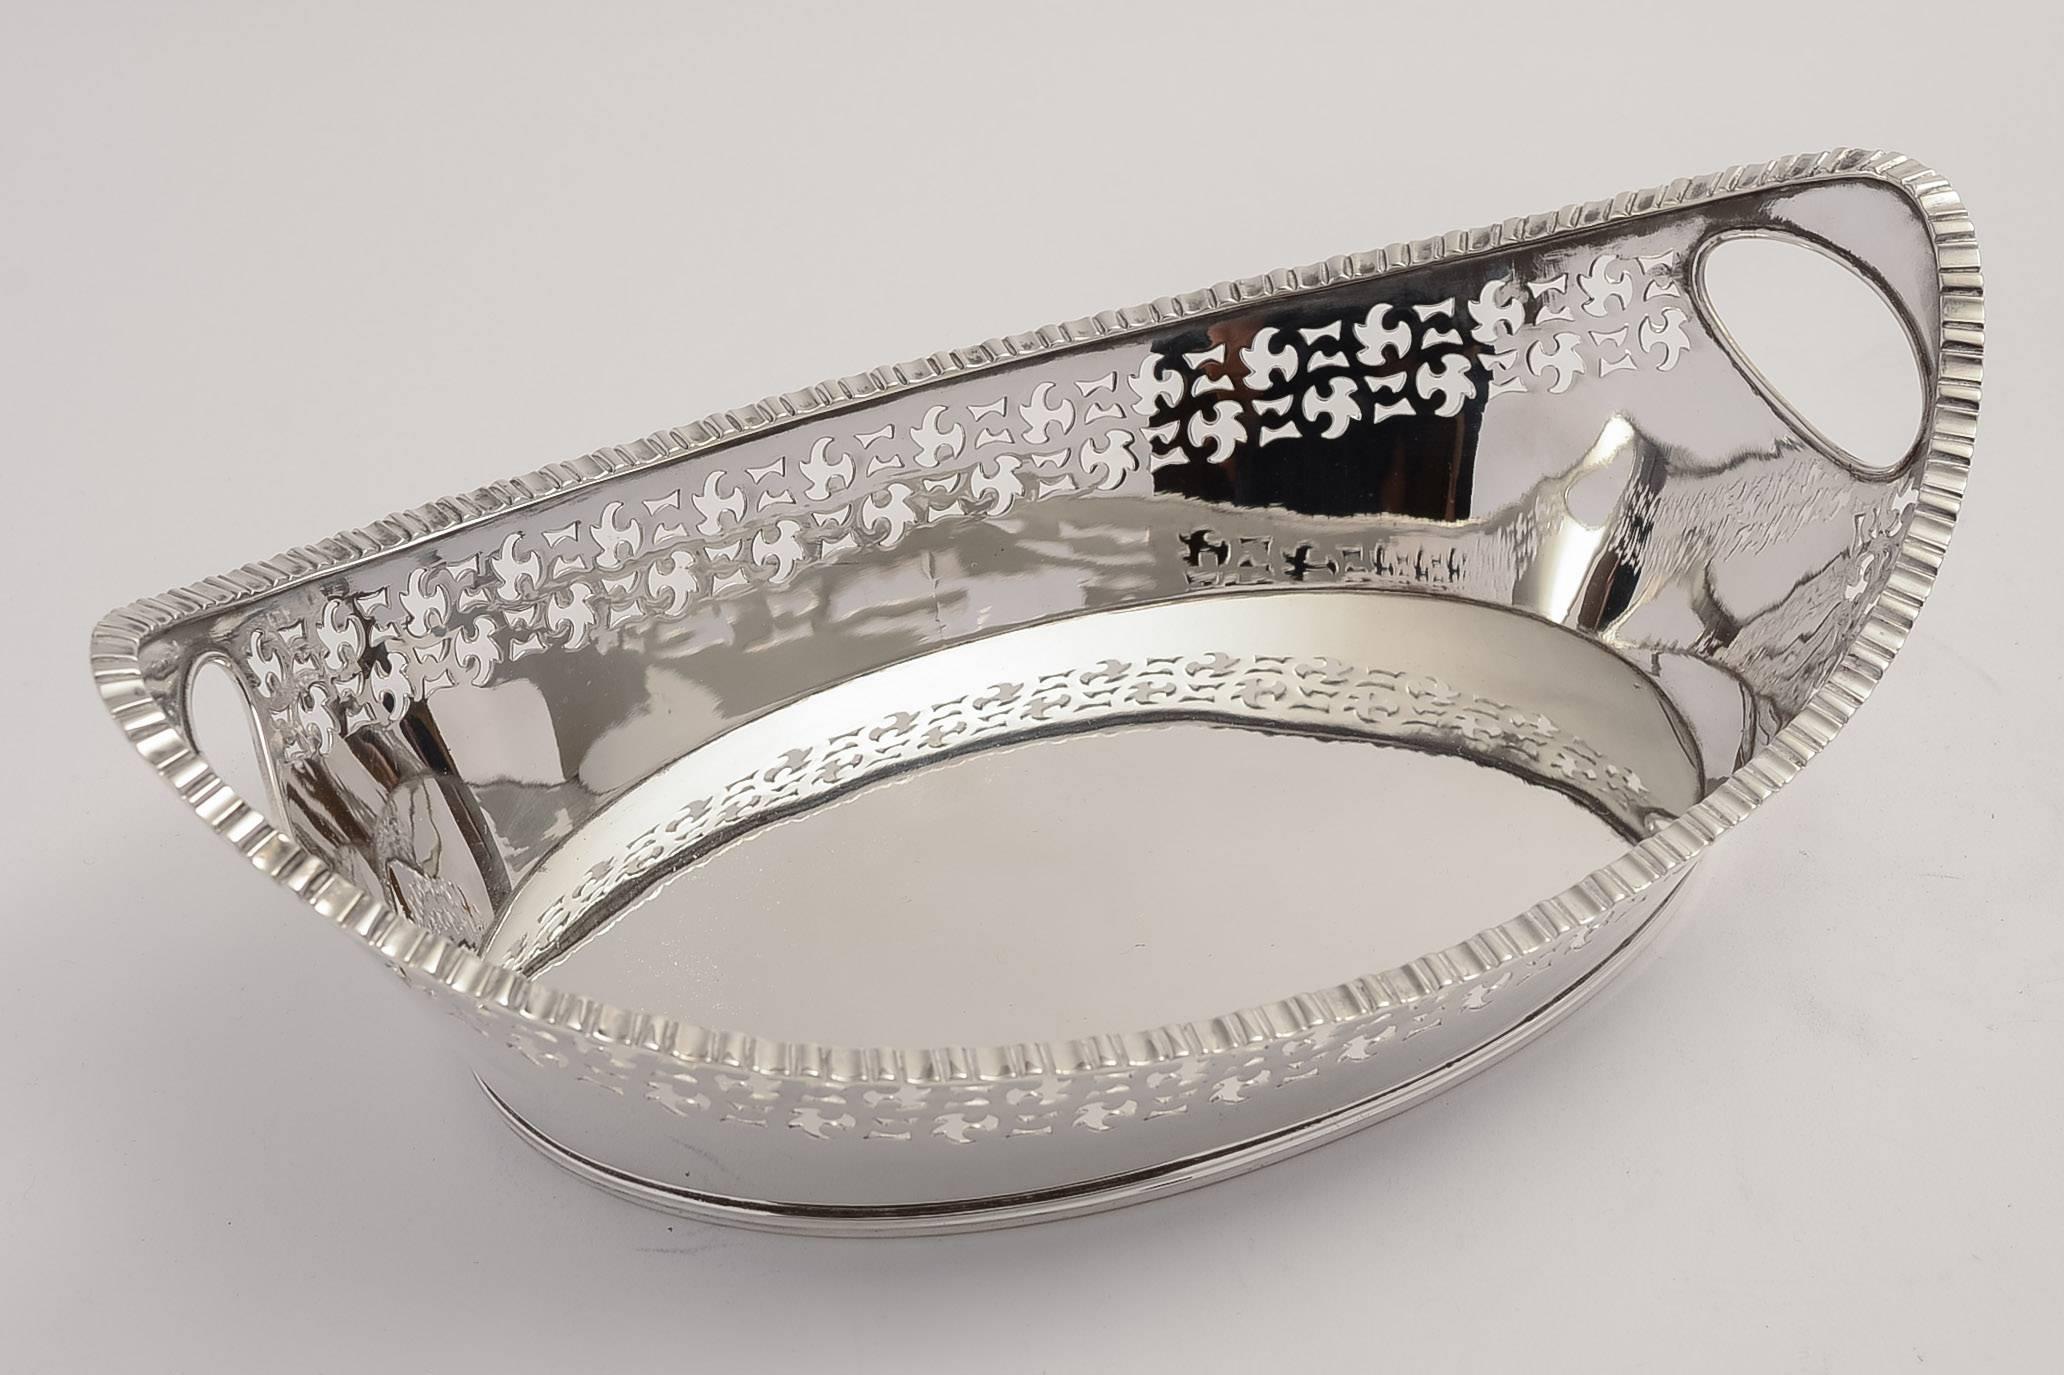 A lovely late Victorian silver plated bread basket with embossed edging and pierced cut-out design to sides, which could be modelled on birds in flight. It also has cut-out handles to each end, circa 1890.

Worldwide, first class, tracked and